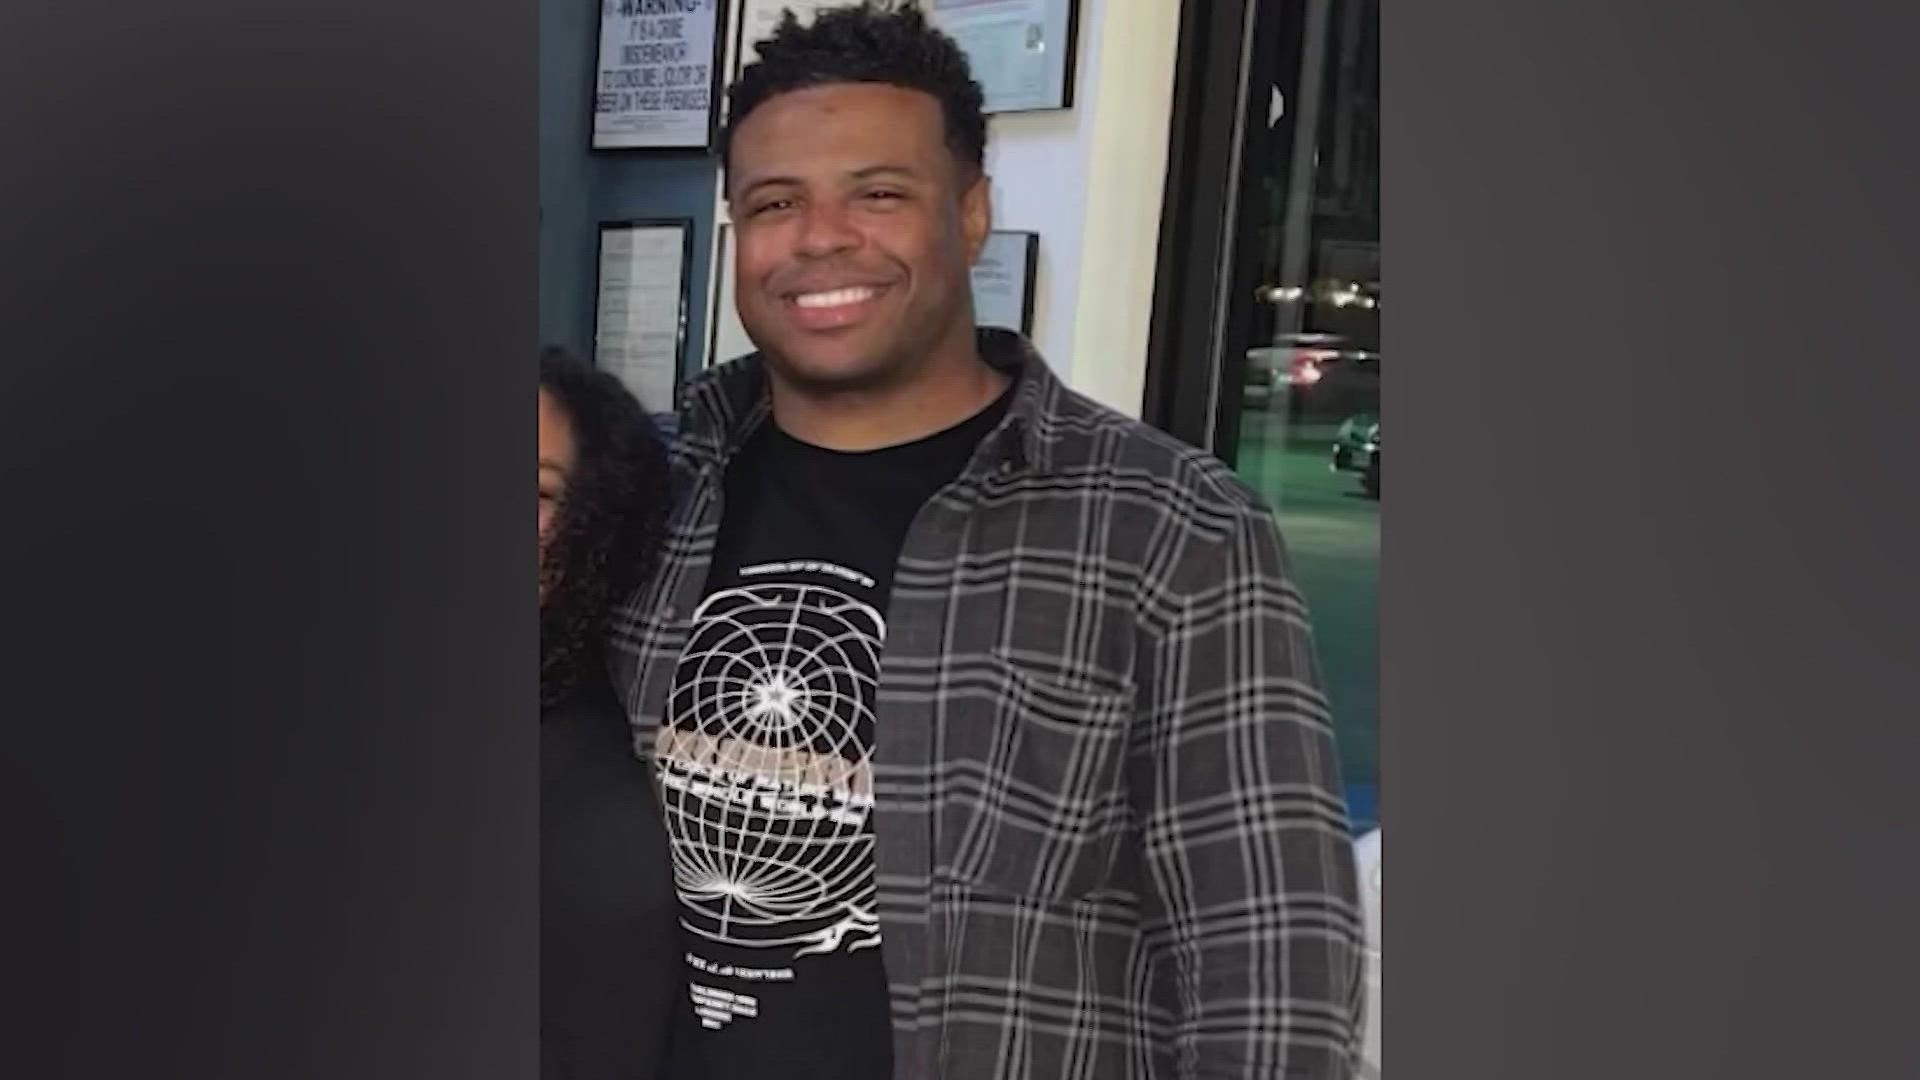 Delano Burkes hasn't been seen or heard from since he was seen on video stumbling near some bars in the Heights in the early-morning hours on Nov. 13.